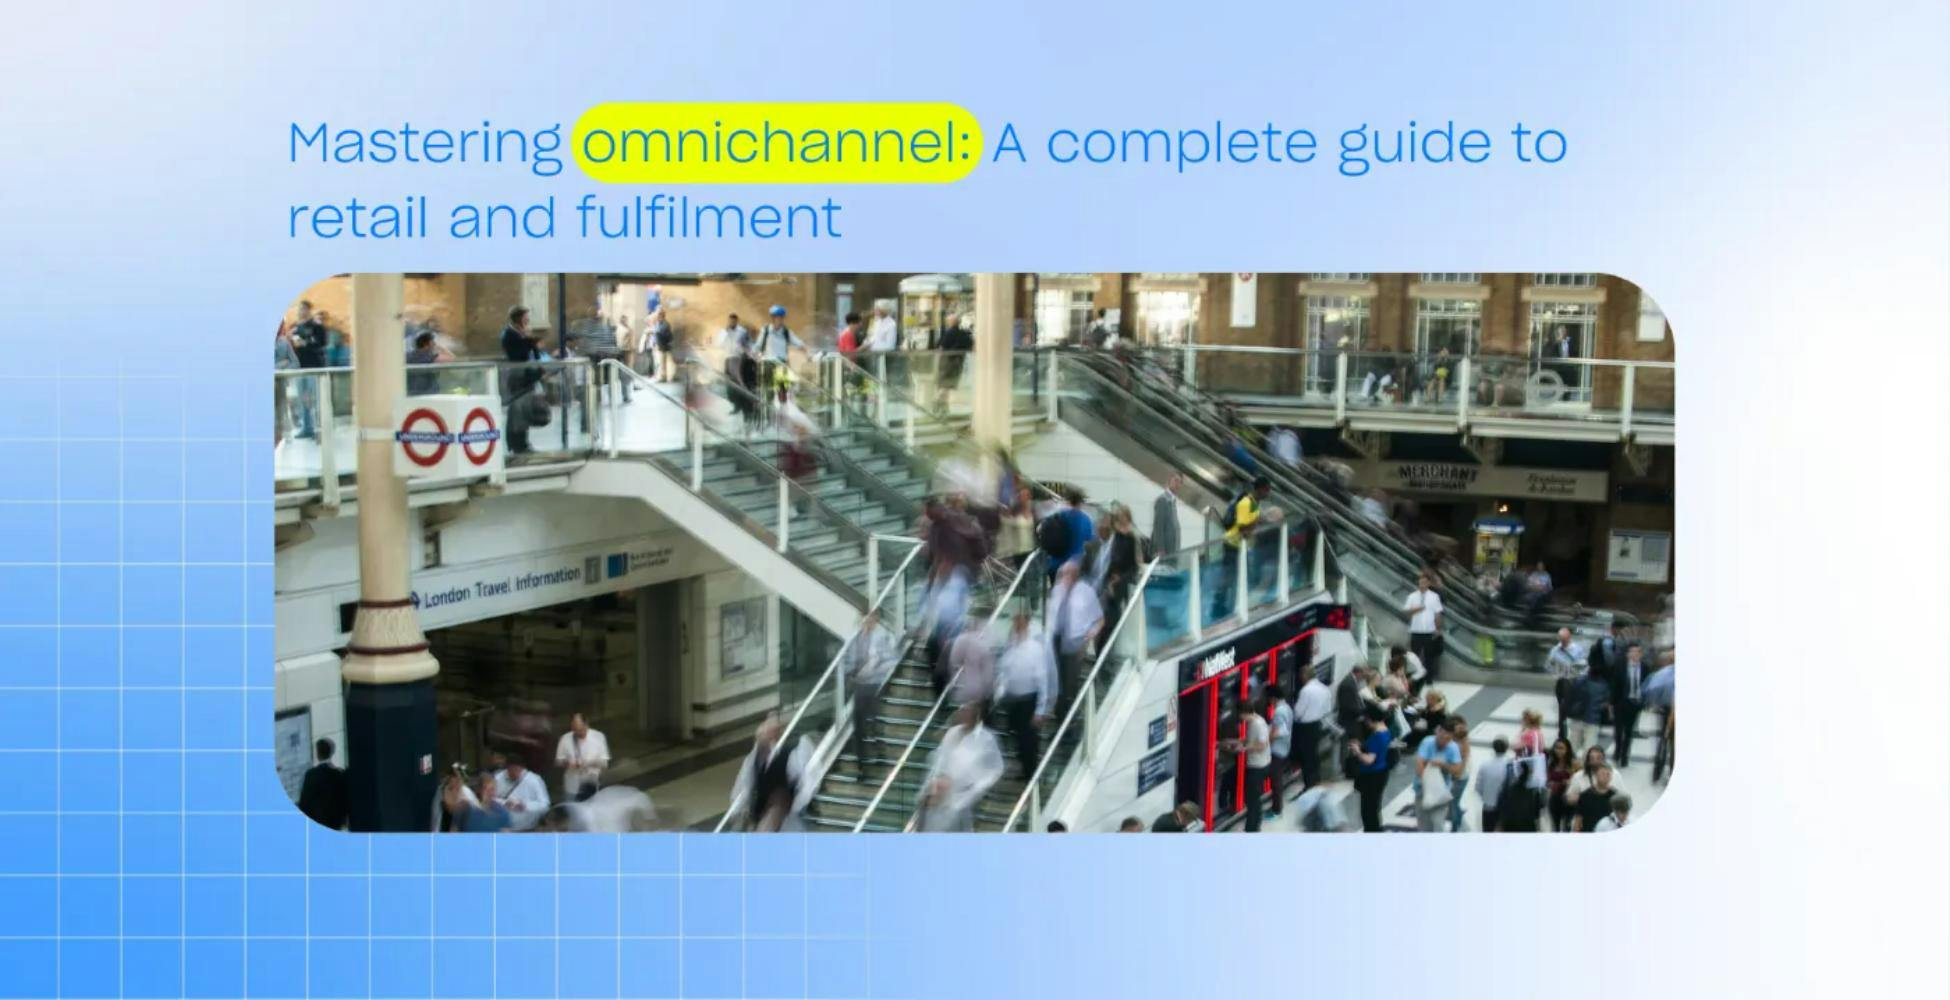 omnichannel retail and omnichannel fulfilment guide to get started - blog cover image with photo of mall